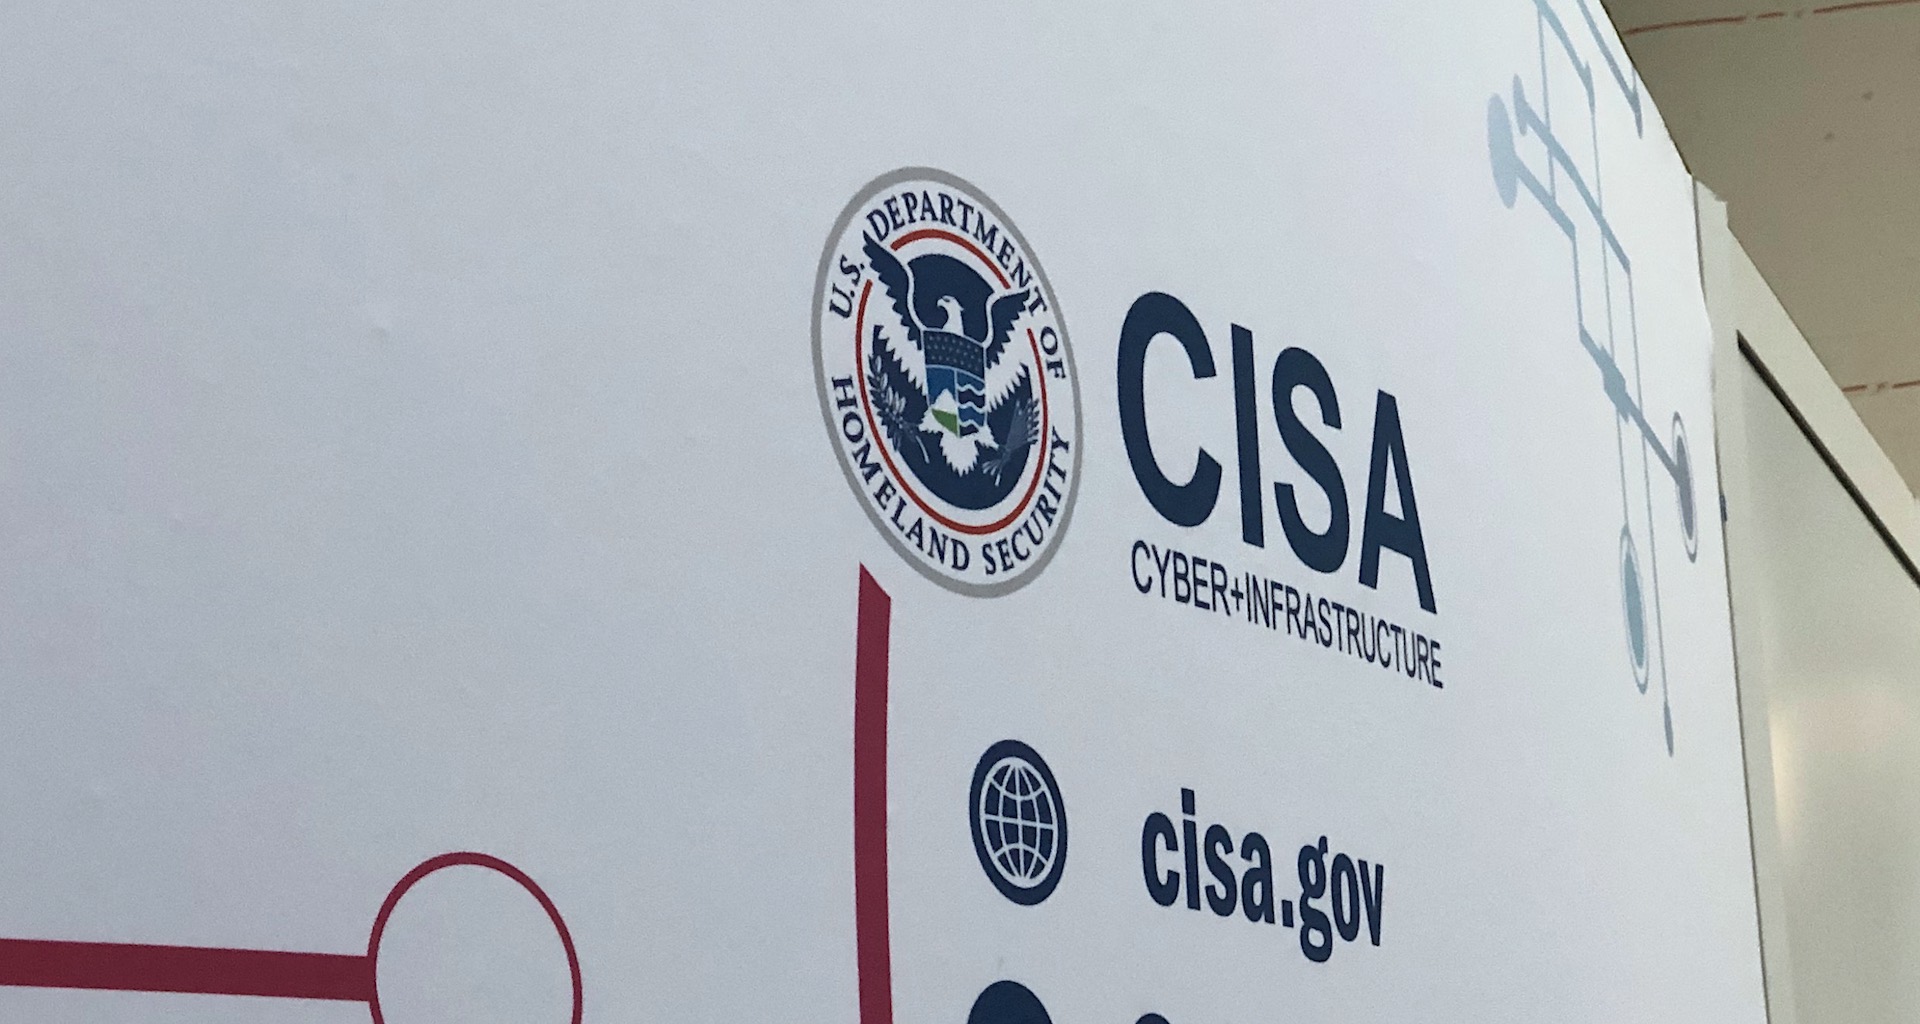 CISA's advisory panel is announced, set to make recommendations on major cyber topics